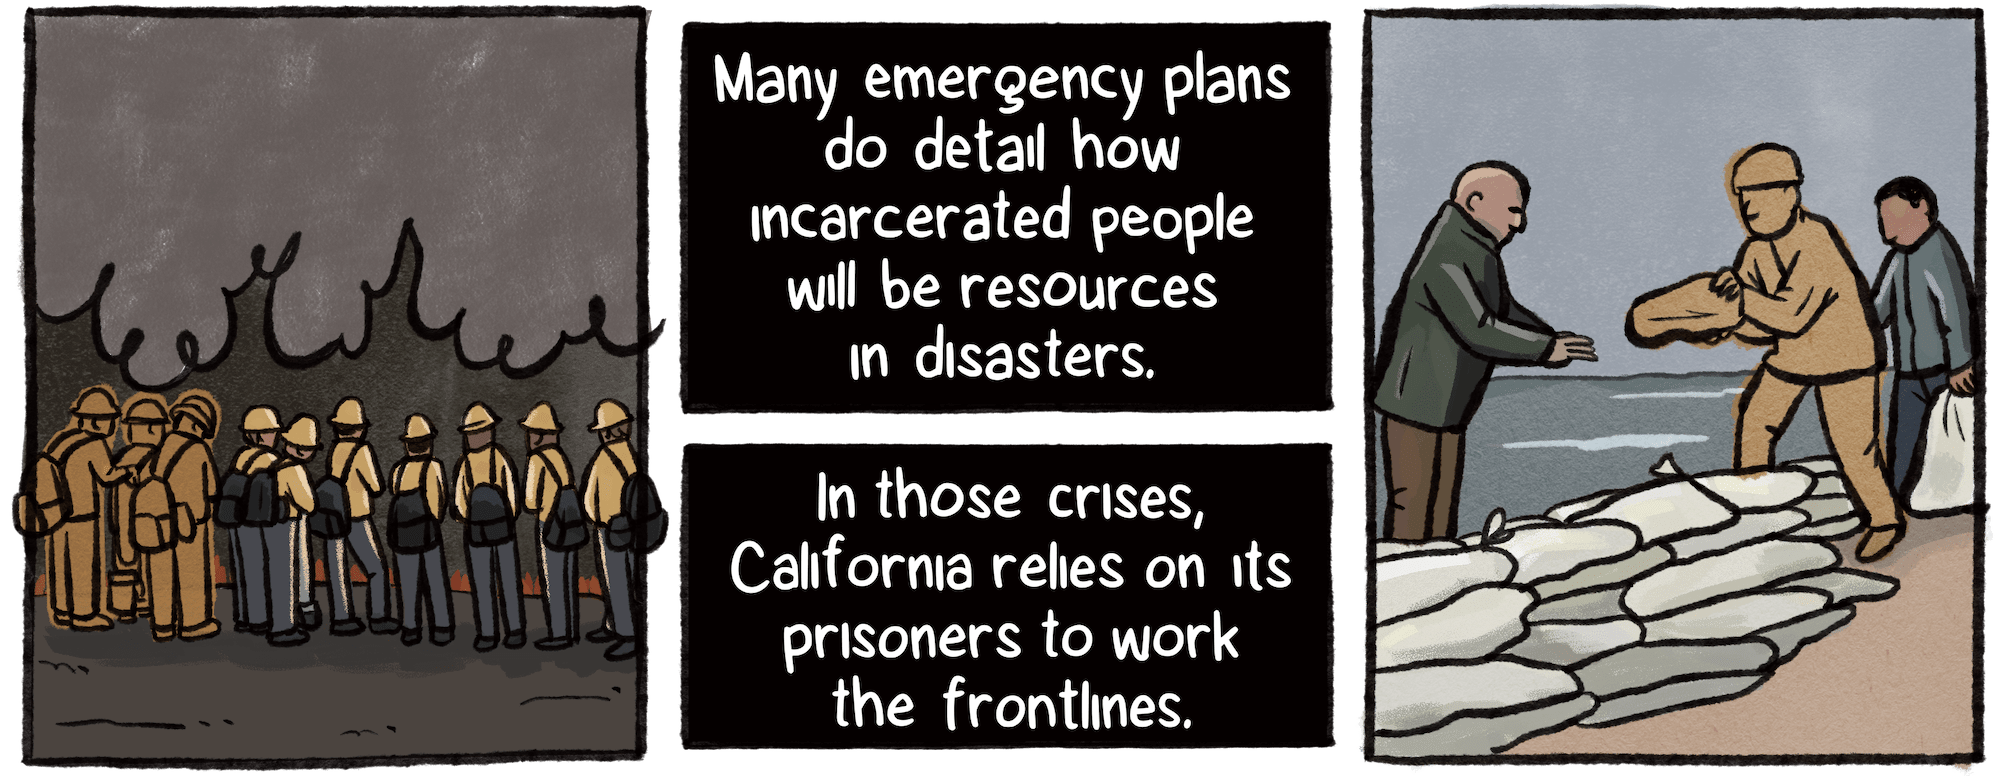 A group of people wearing helmets and backpacks gather next to a cloud of smoke. Next to the scene, people pile sandbags alongside rising waters. A few people in both scenes are highlighted in yellow. California relies on incarcerated people to work the frontlines. Many emergency plans also detail how incarcerated people will be resources in disasters.